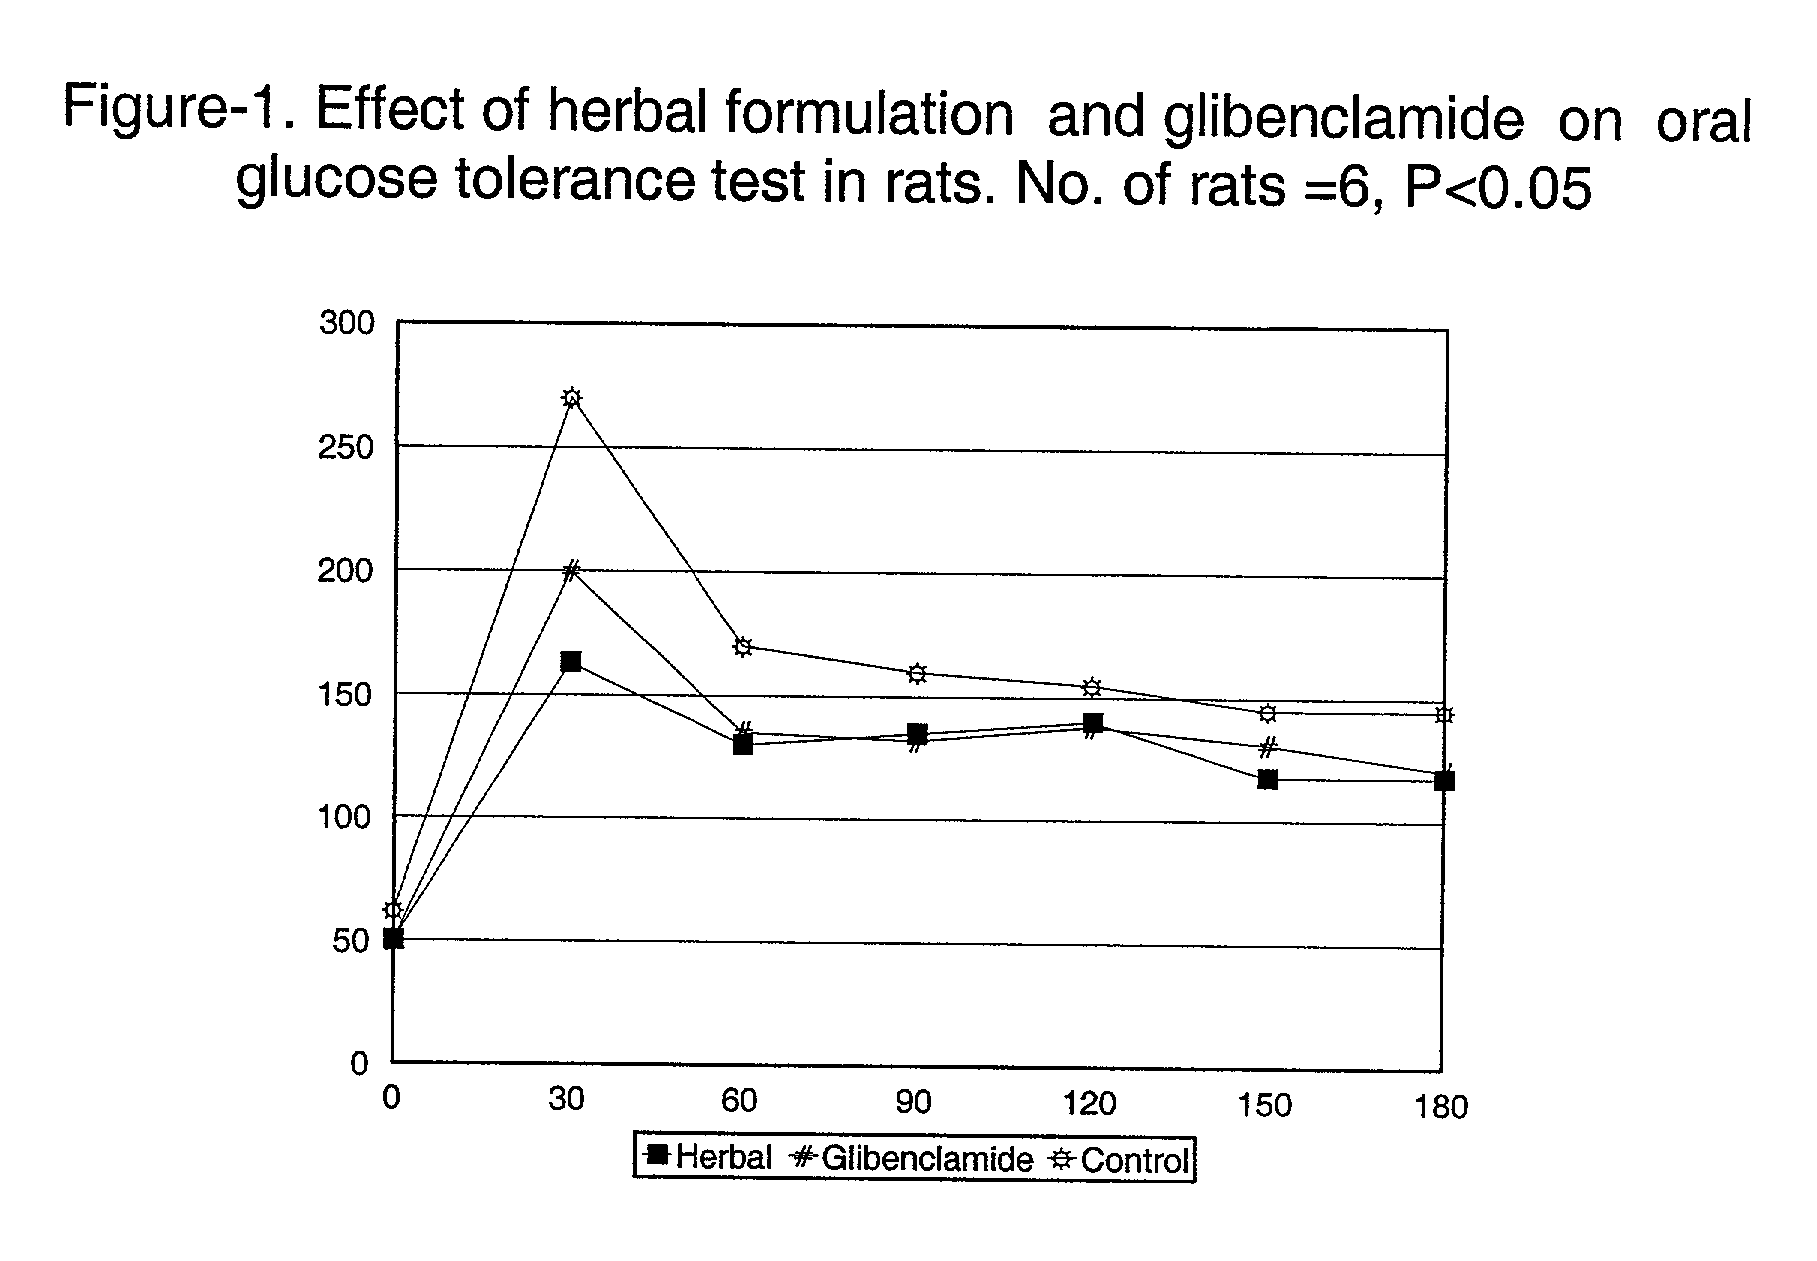 Therapeutic/edible compositions comprising herbal ingredients and methods for treating hyperglycemia